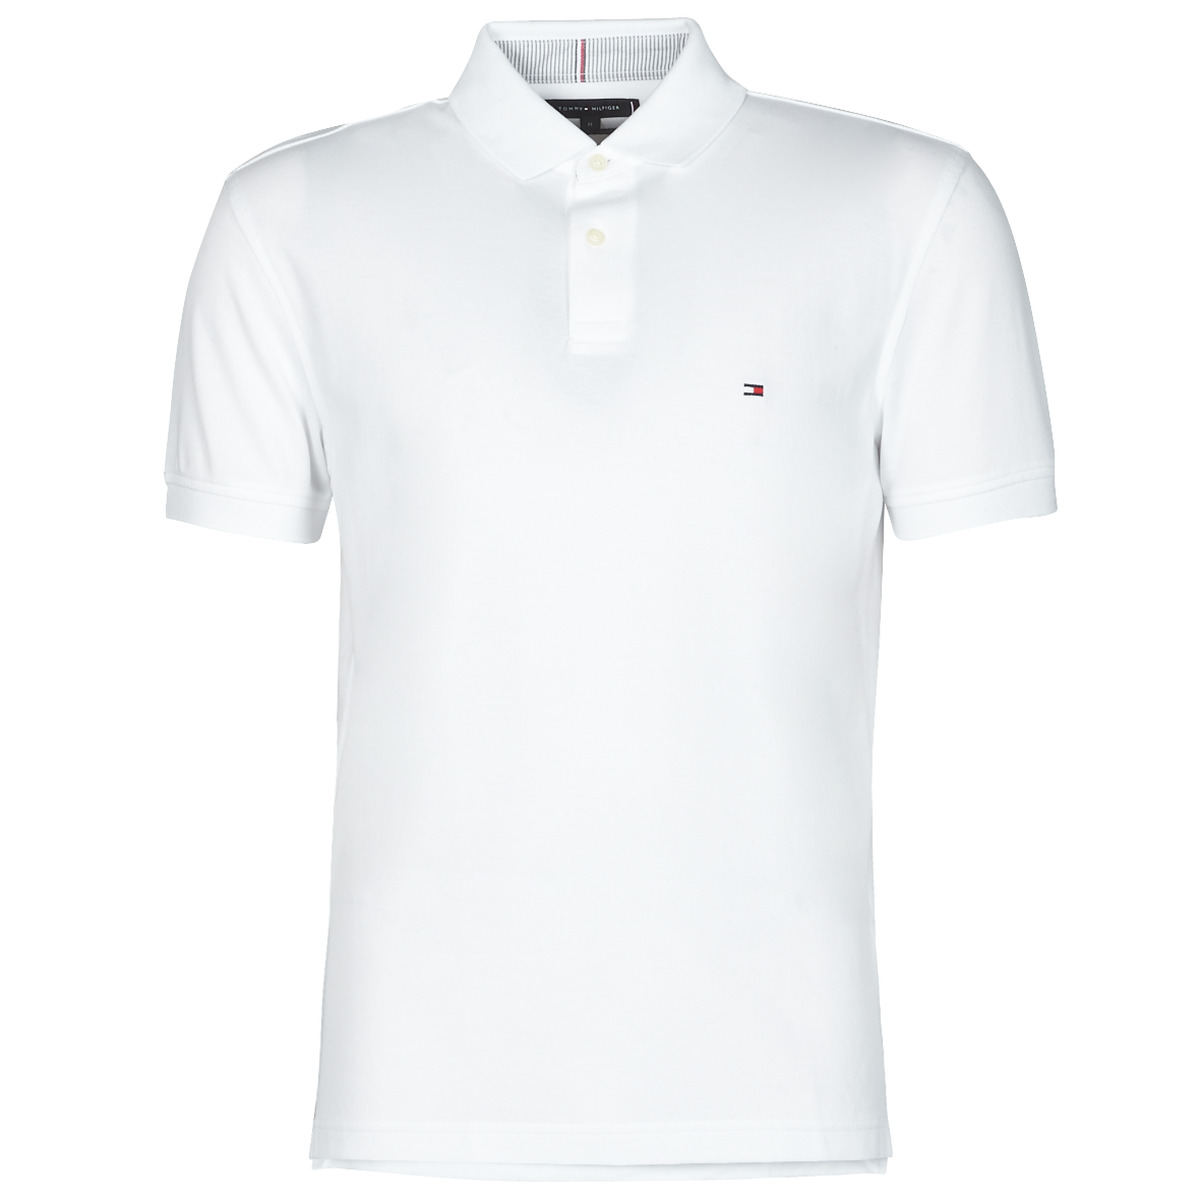 NET Tommy shirts Men - Clothing short-sleeved REGULAR Hilfiger Spartoo delivery 1985 White - ! | POLO polo Free